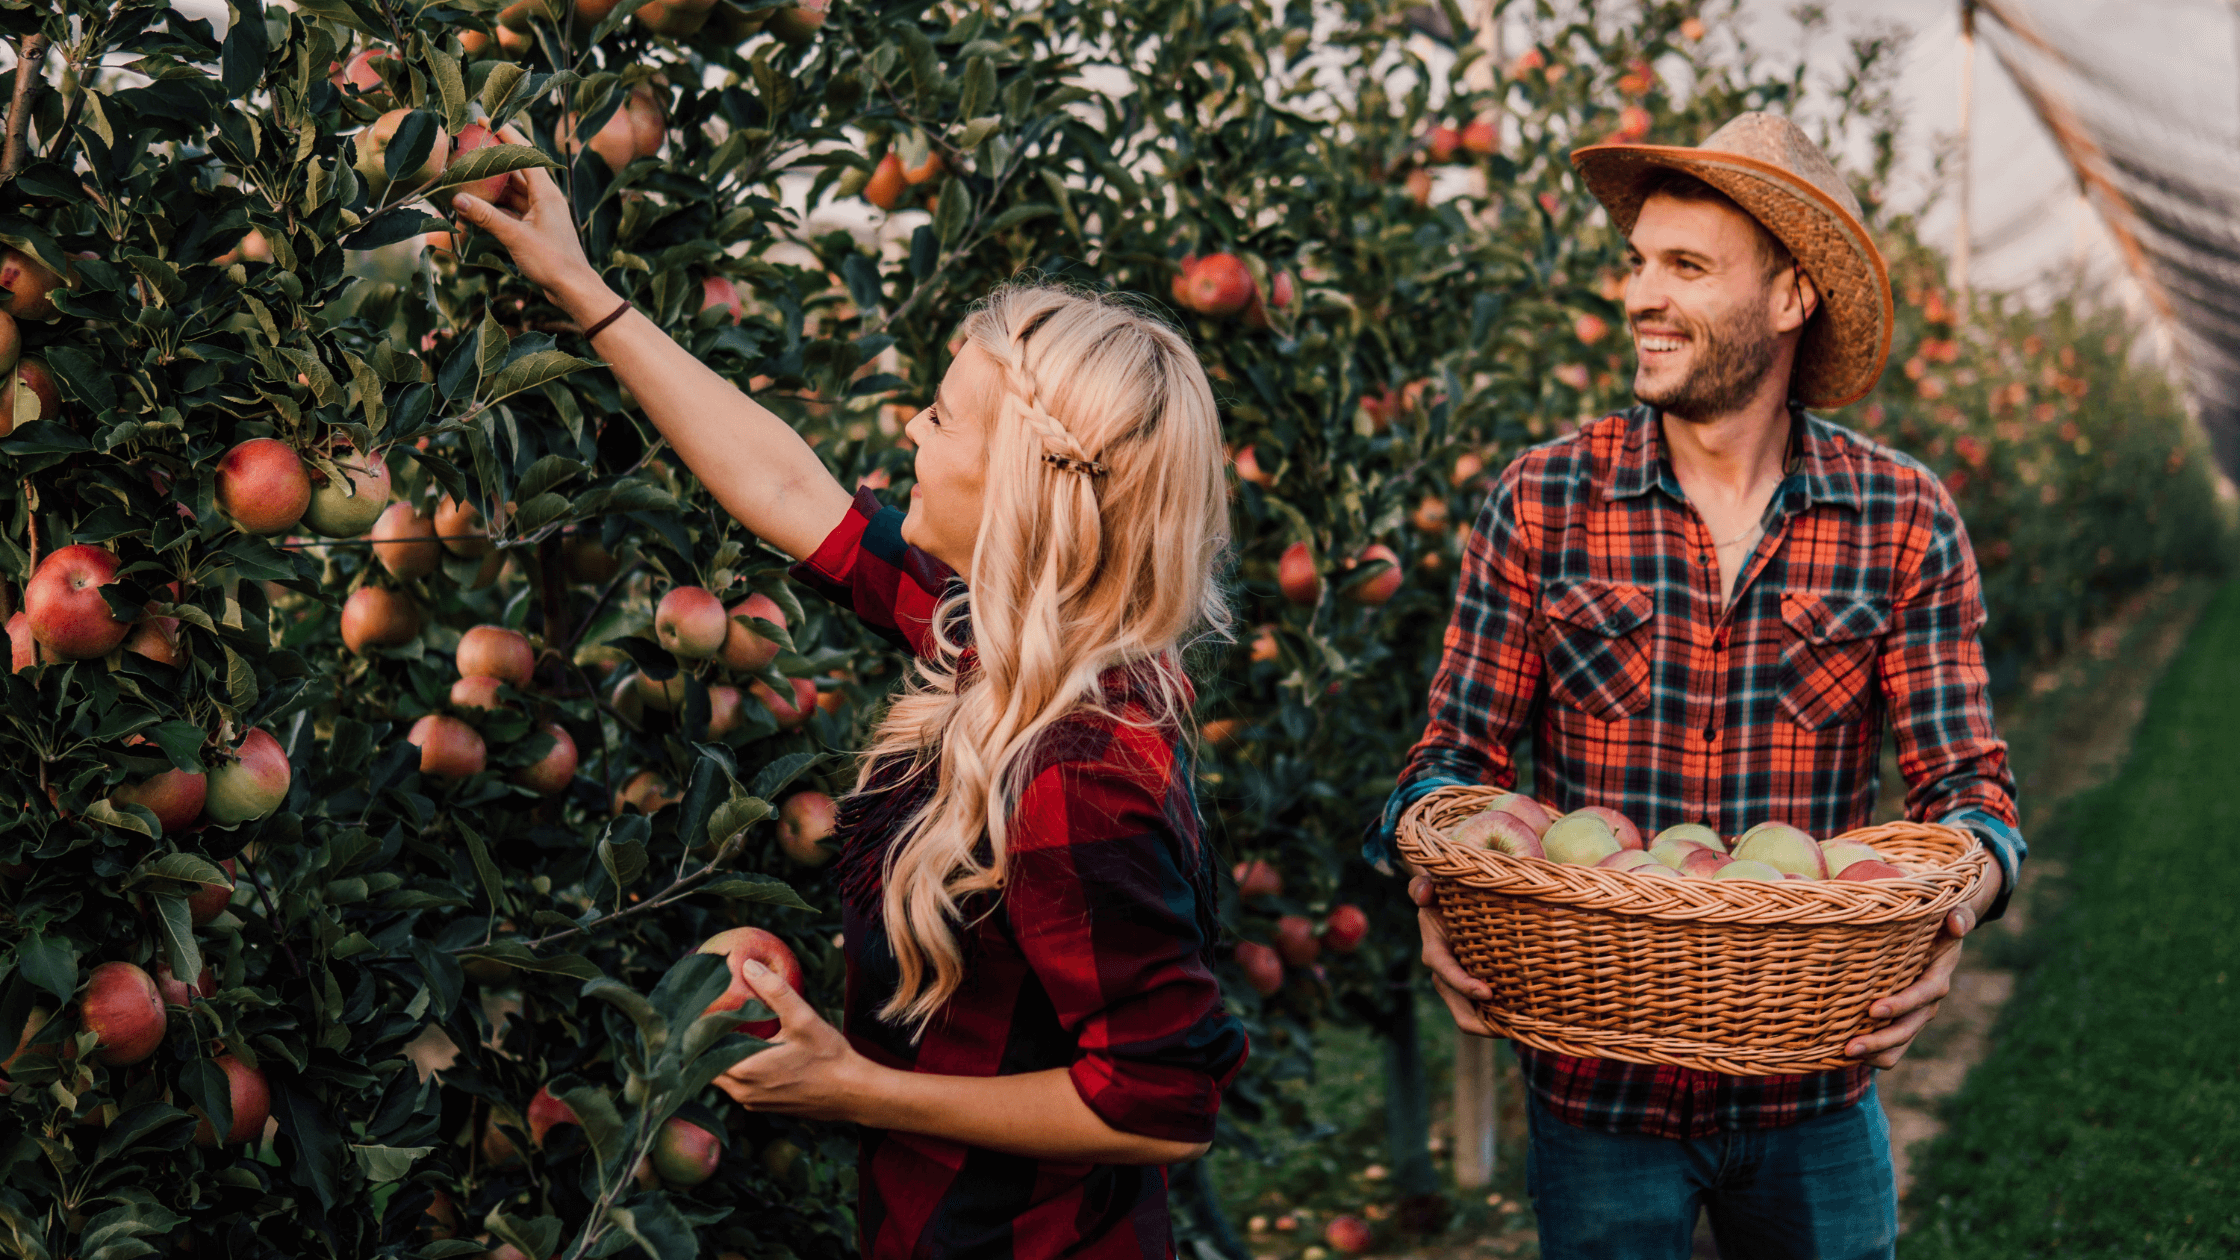 Fall in Love This Autumn: The Apple Picking Date You Won't Forget 5